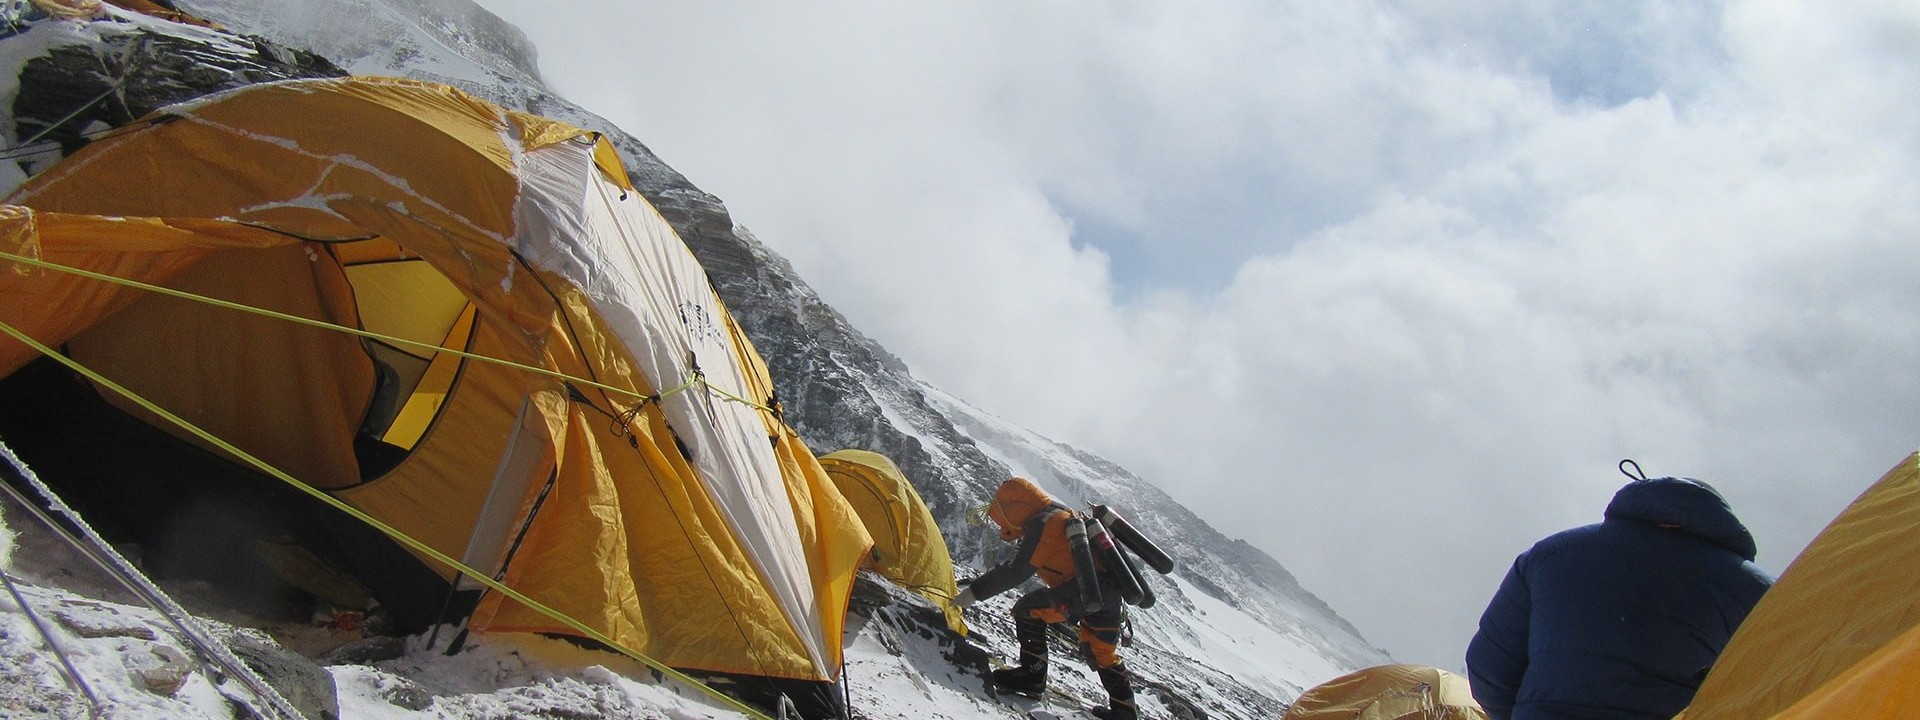 Everest Expedition (8850m) from Tibet